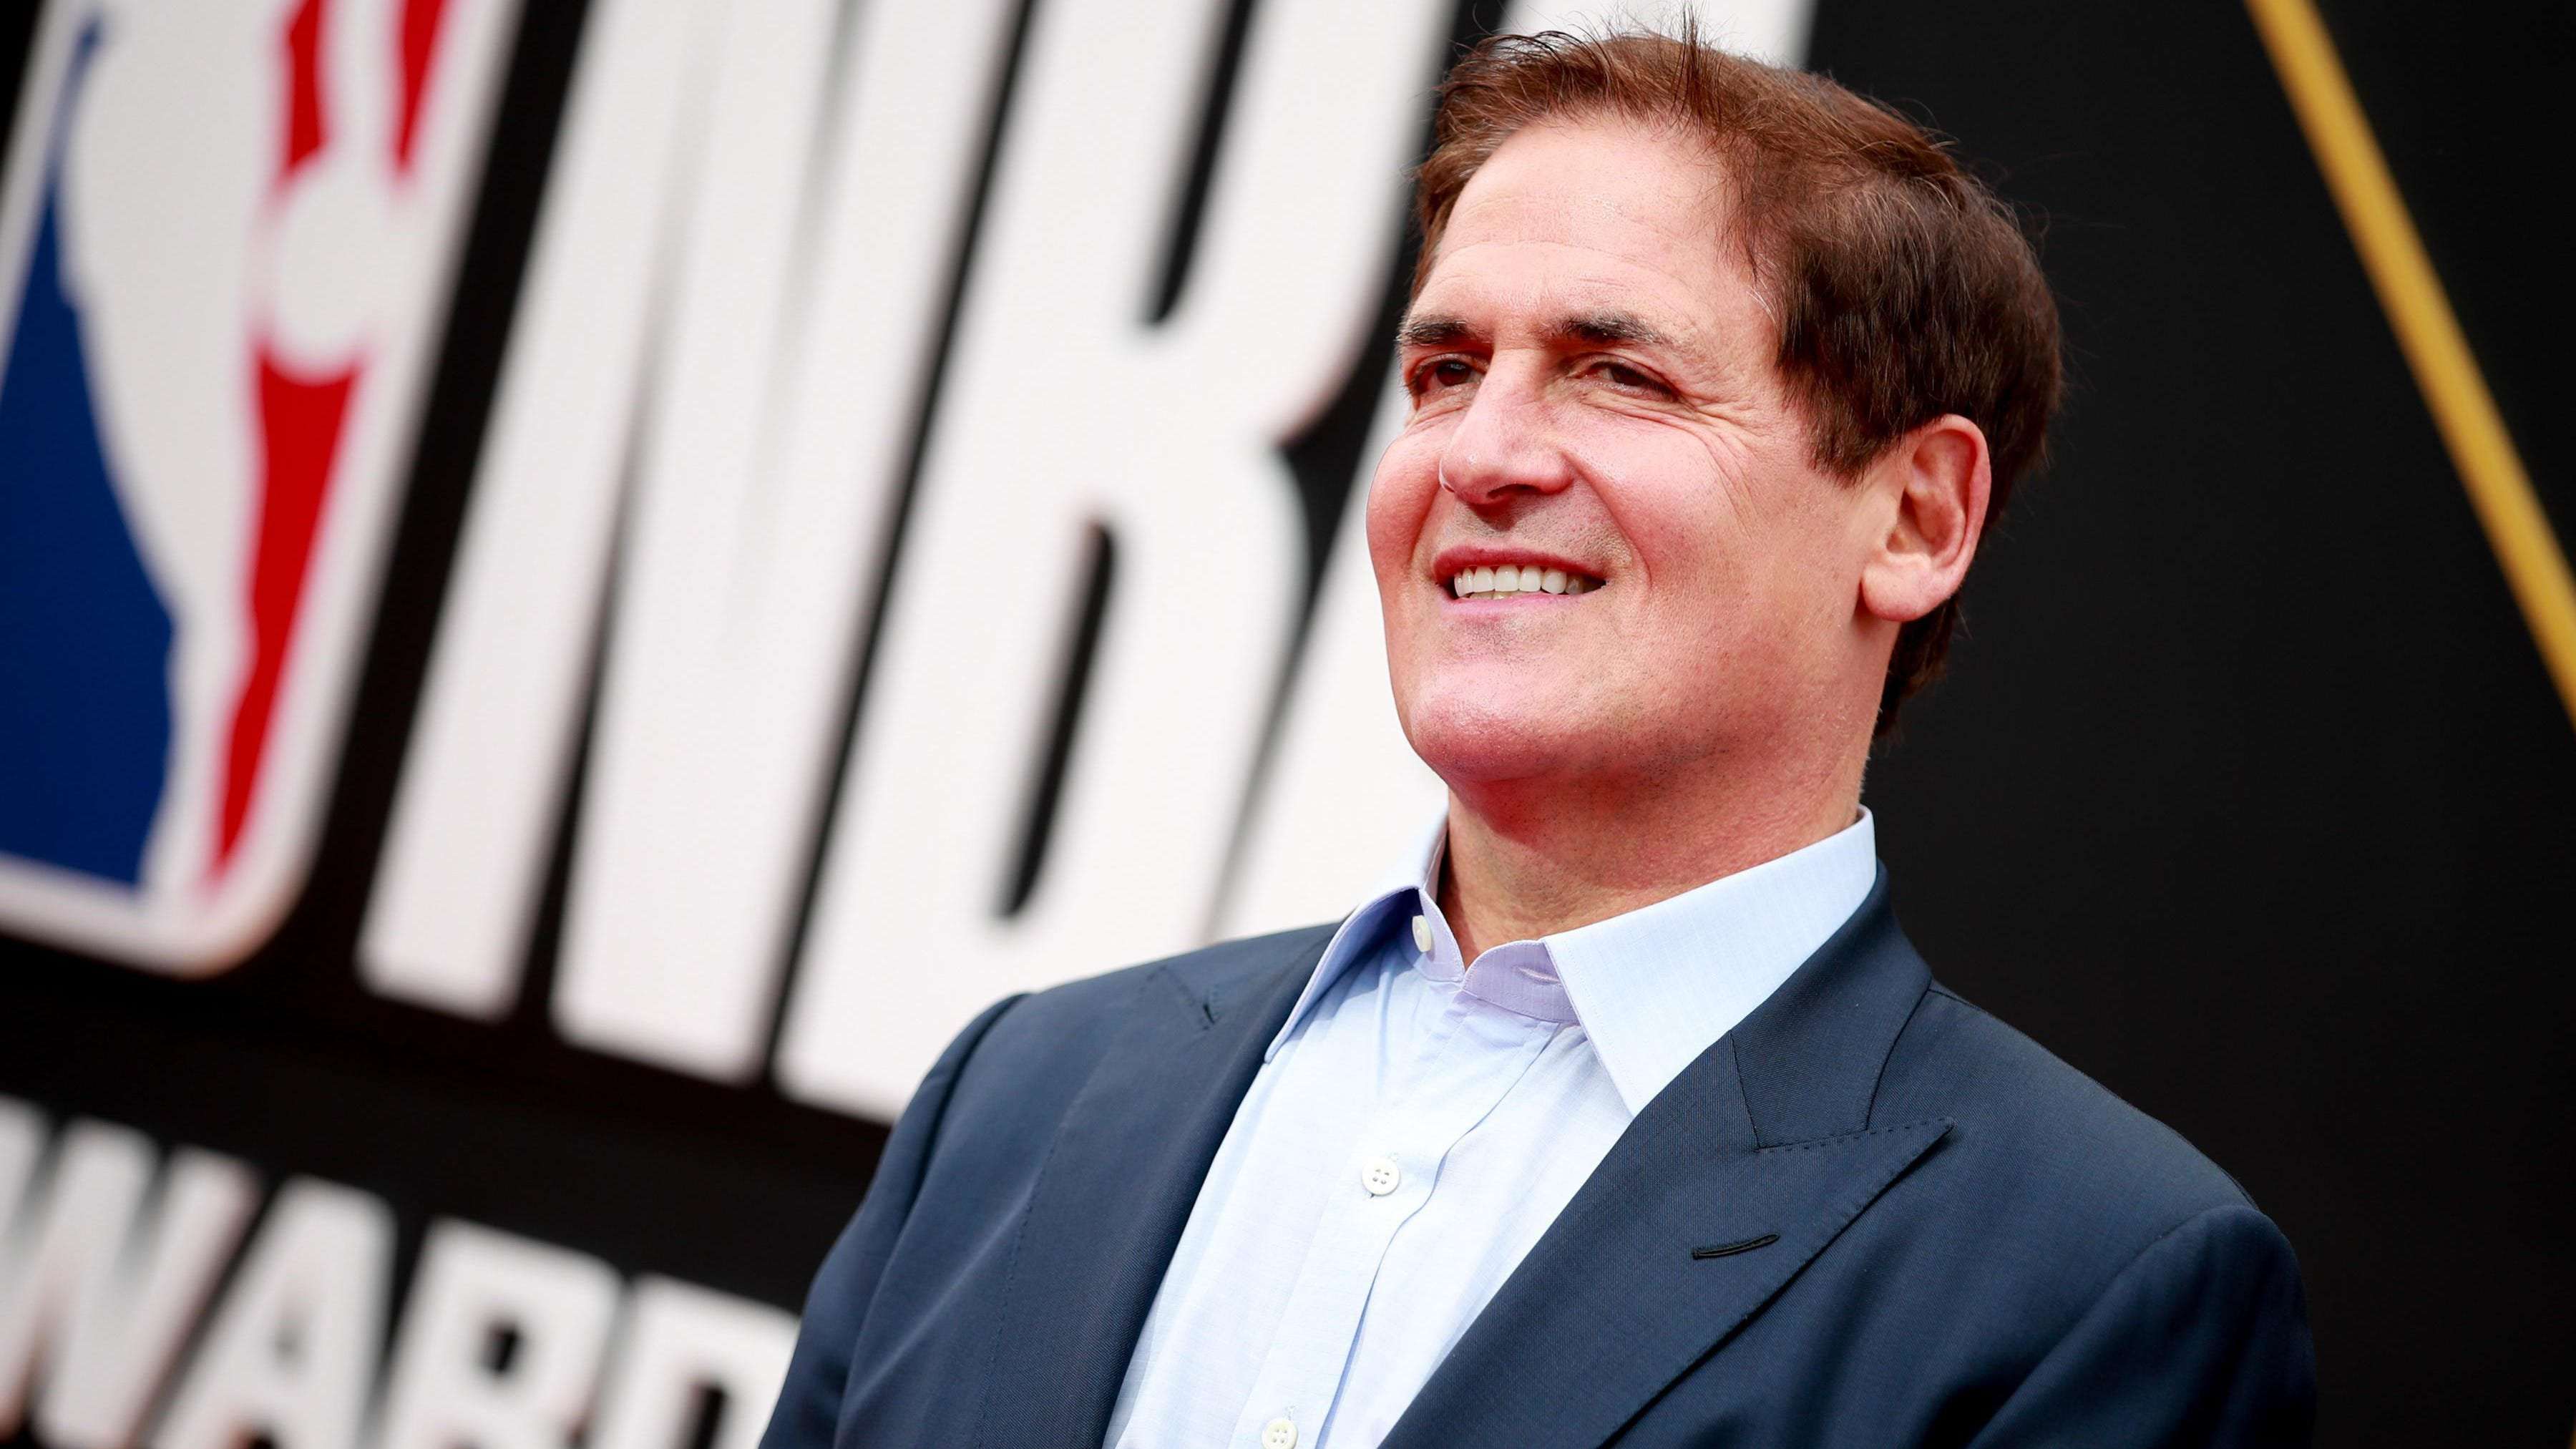 image for Billionaire Mark Cuban Opens Online Pharmacy To Provide Affordable Generic Drugs